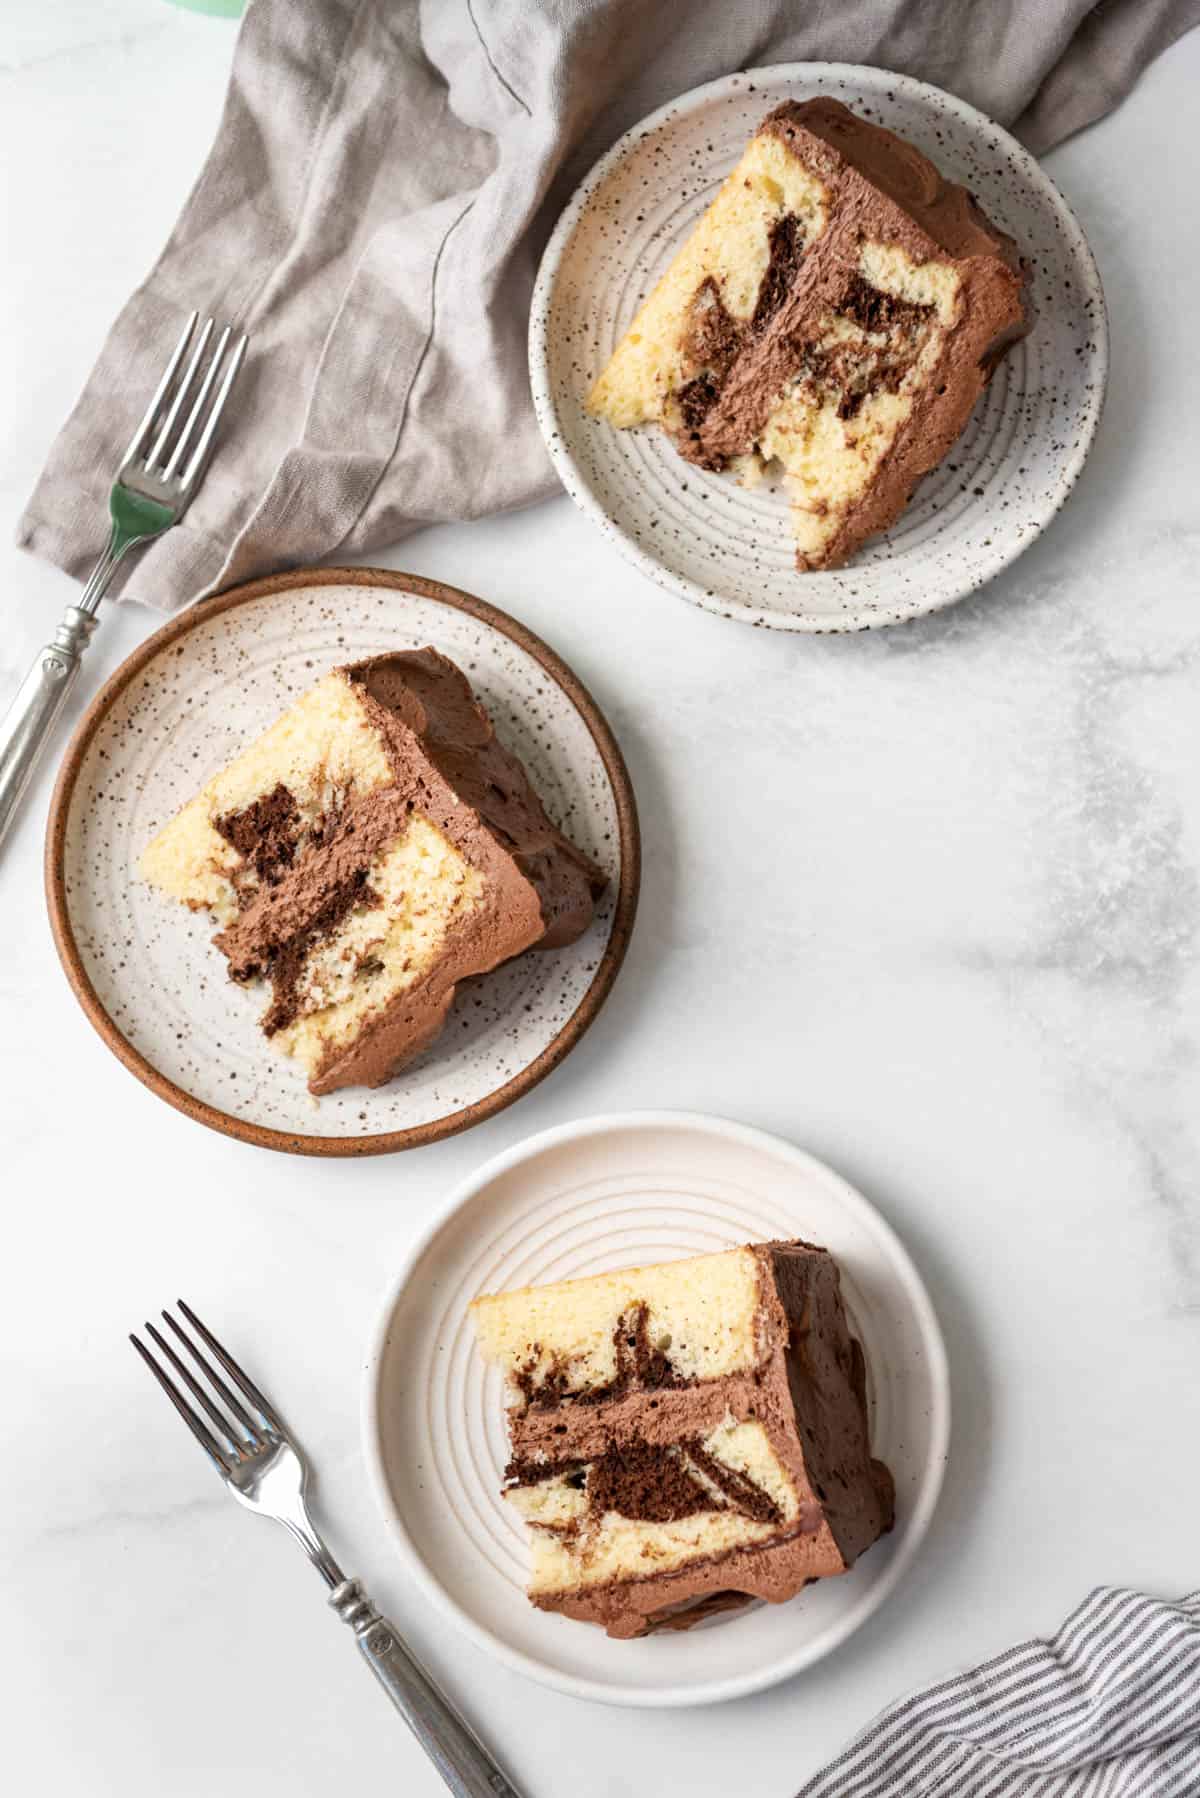 Three slices of marble cake on plates.